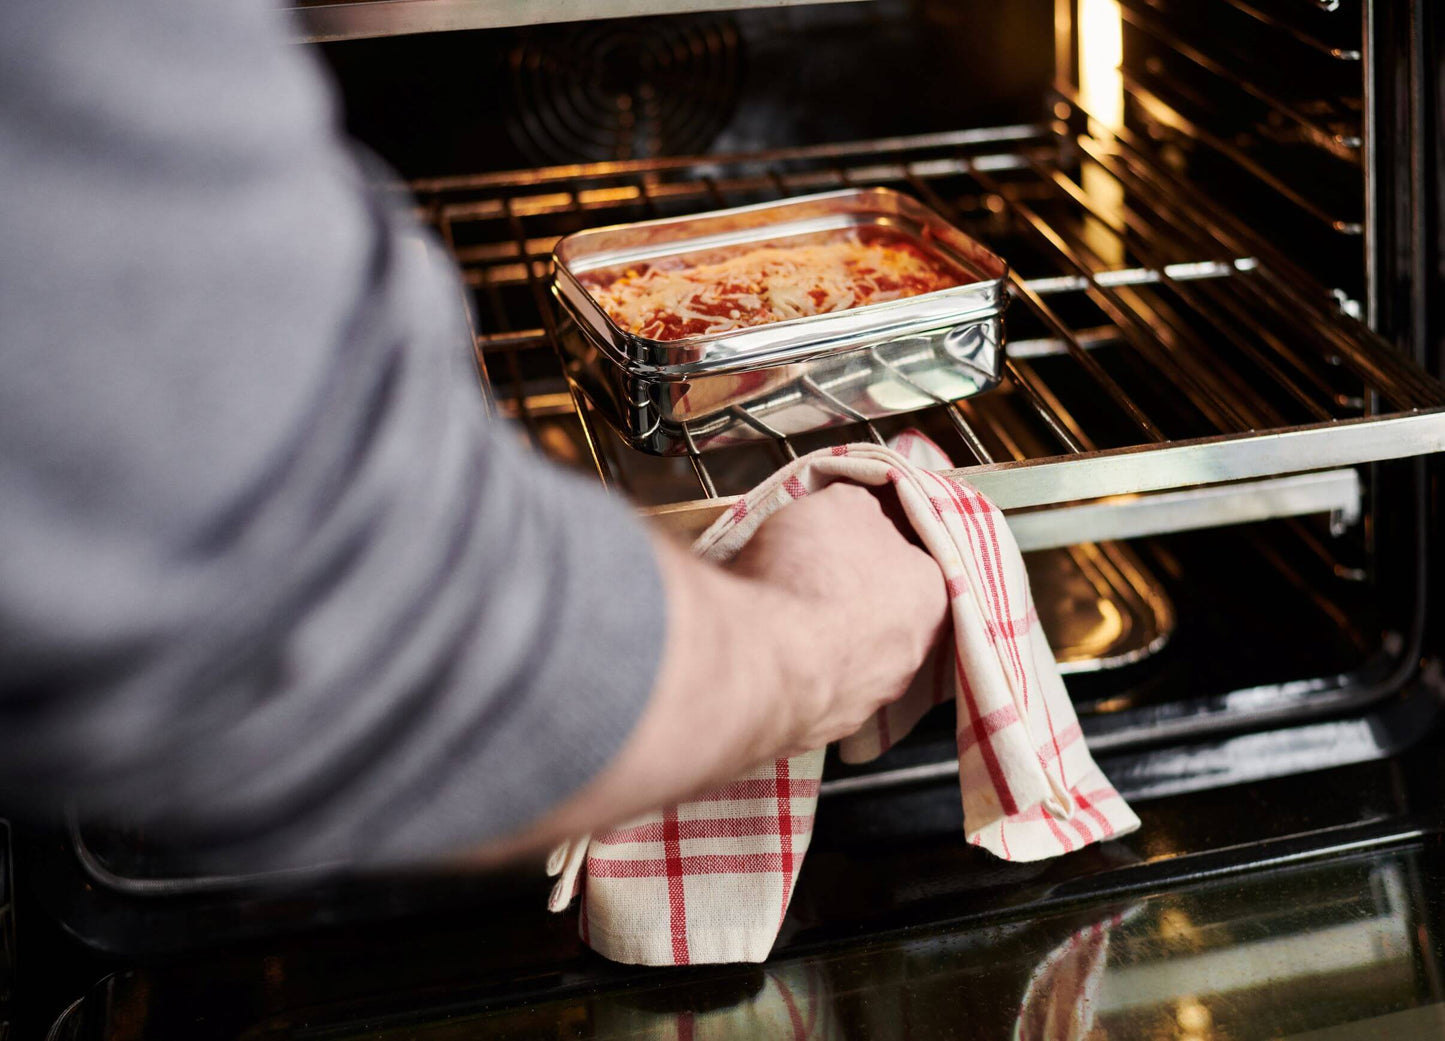 Hand putting lasagna in stainless steel food storage box inside an oven